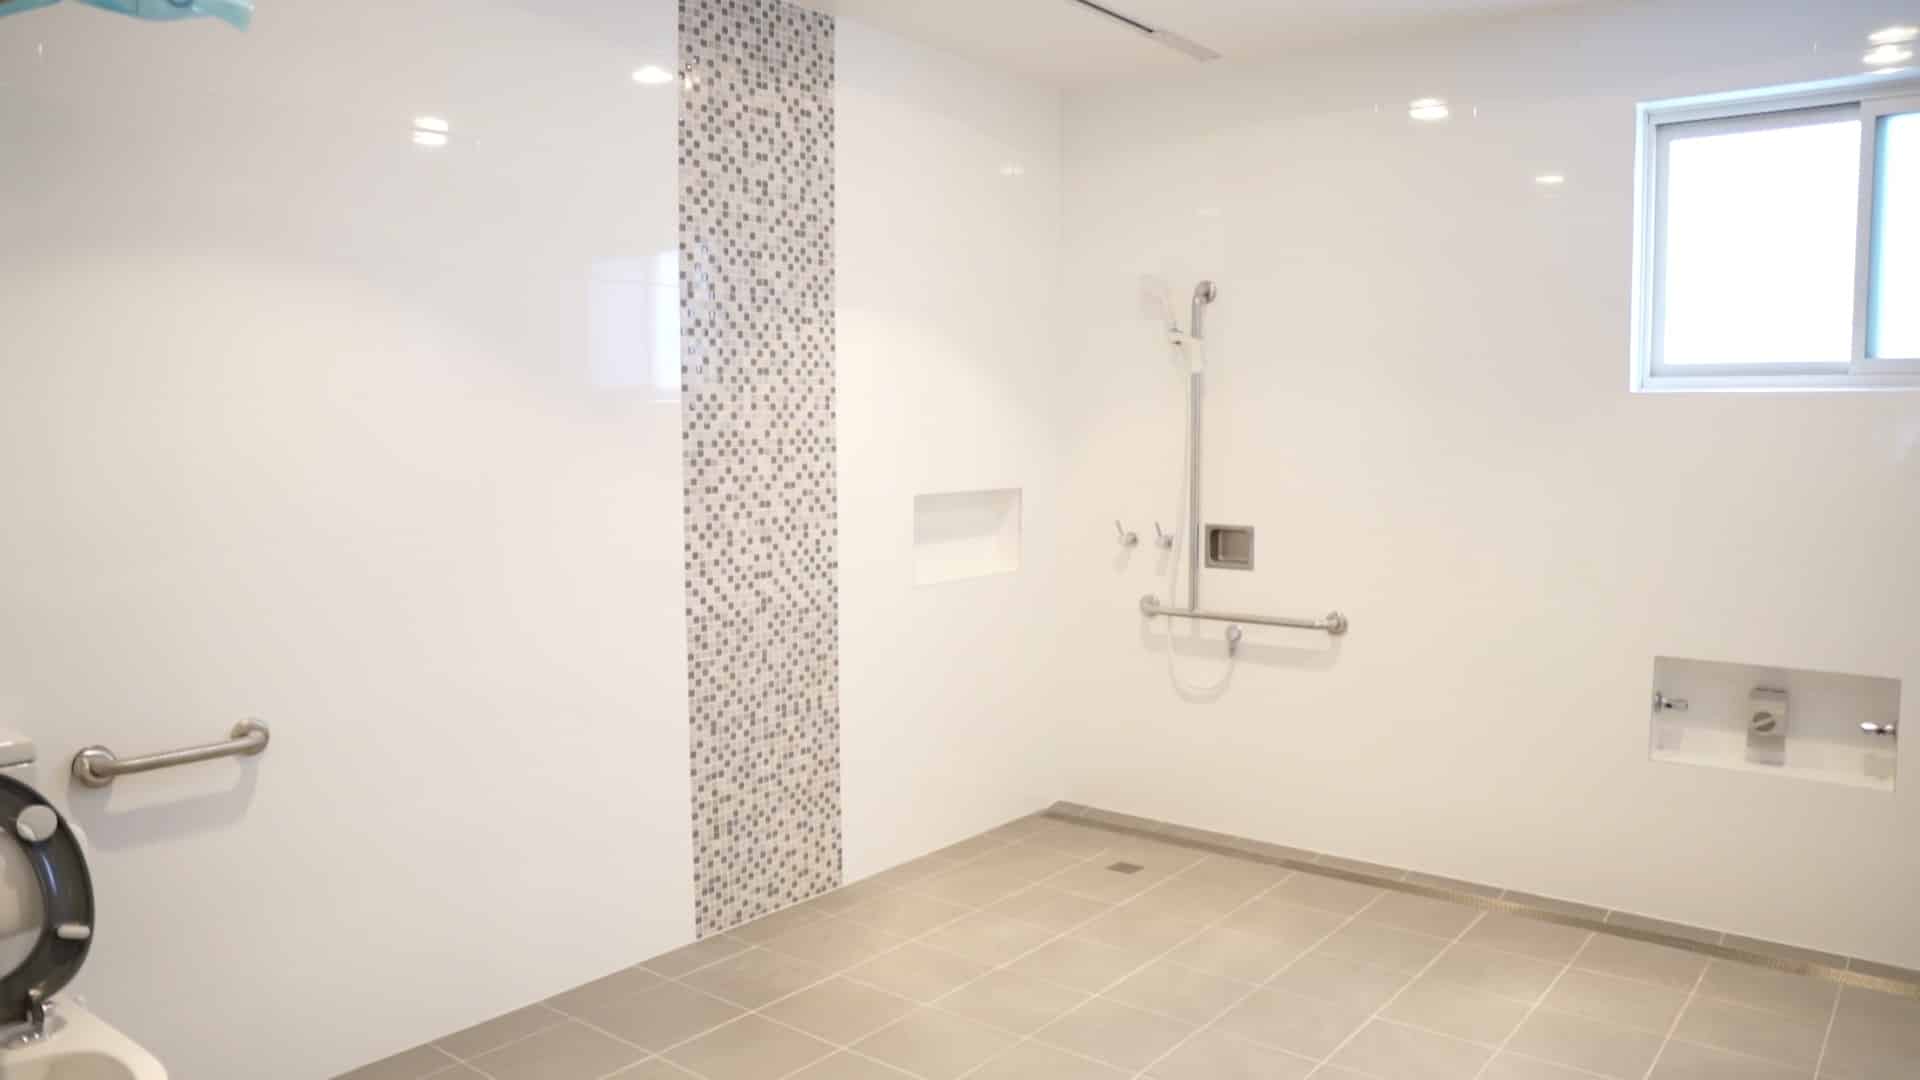 View of a large bathroom with shower area, window and toilet.